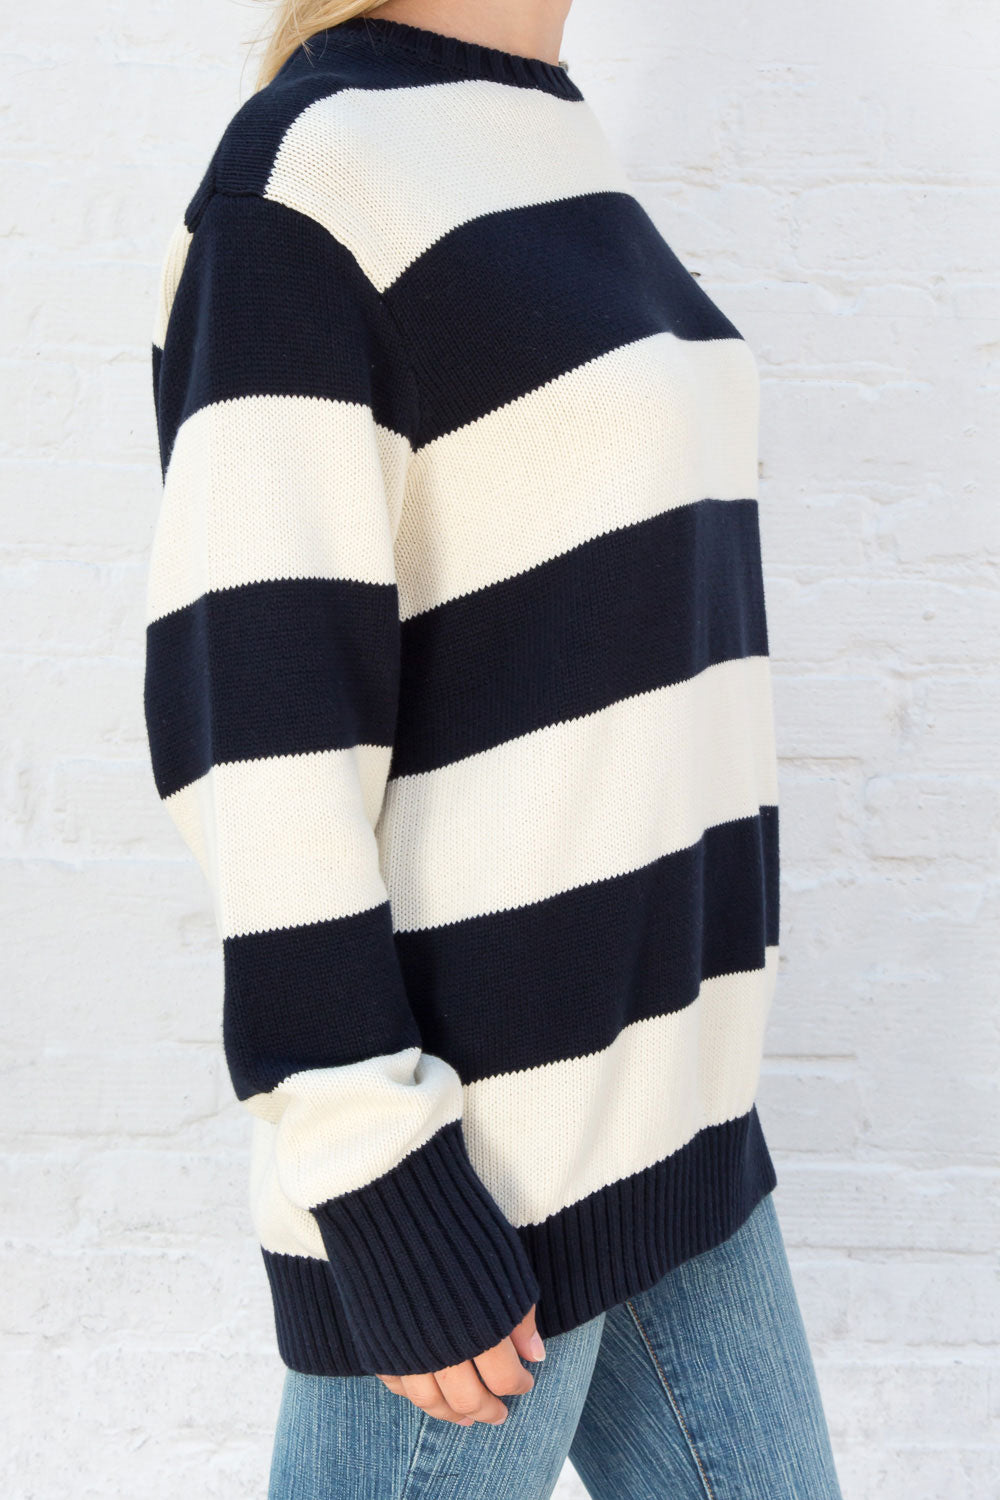 White With Navy Blue Stripes / Oversized Fit